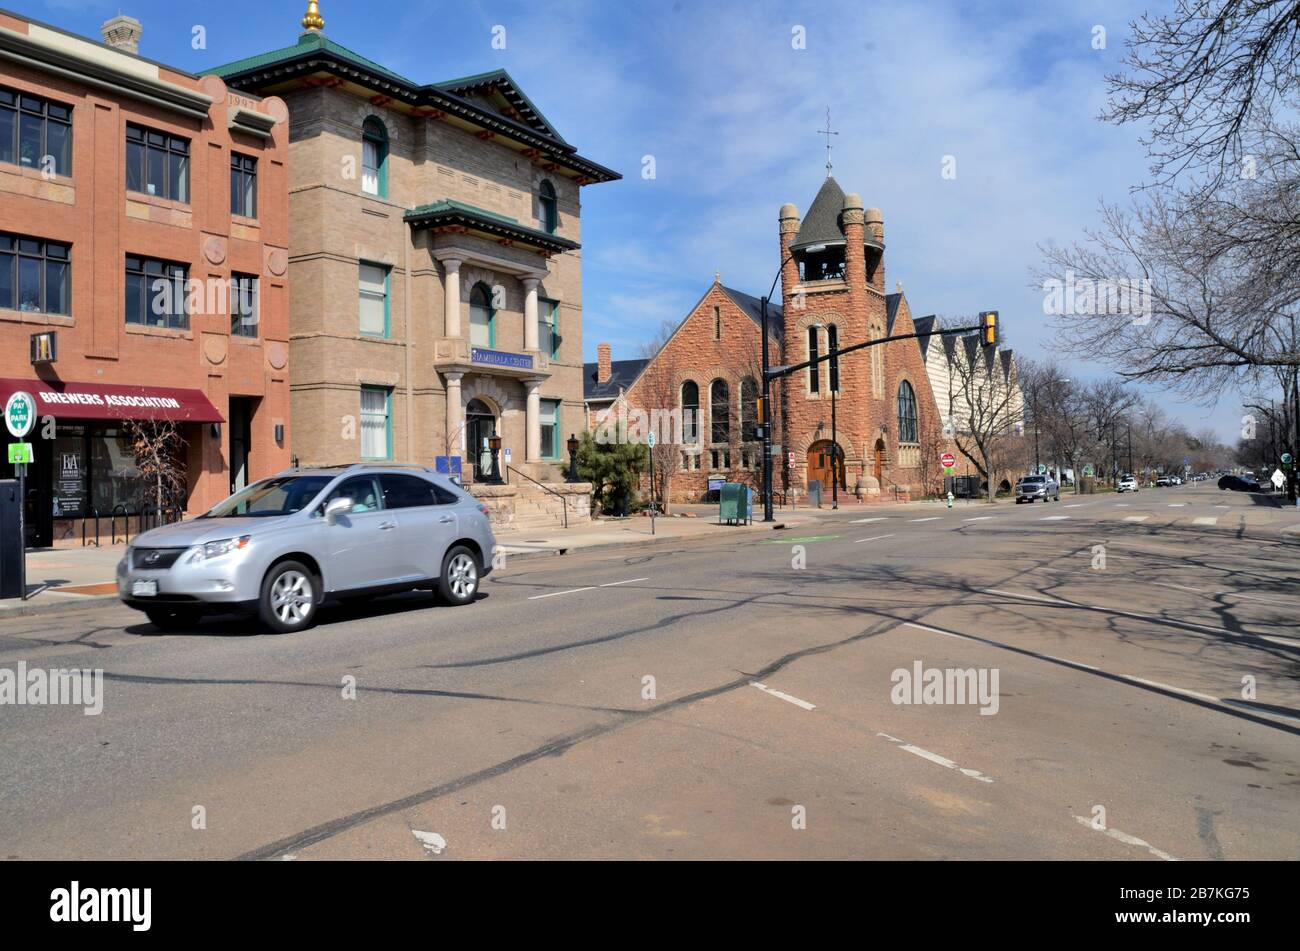 On a sunny March Monday with afternoon temperatures above 50 degrees, Downtown Boulder would be buzzing with activity. March 16, 2020 was different. Stock Photo